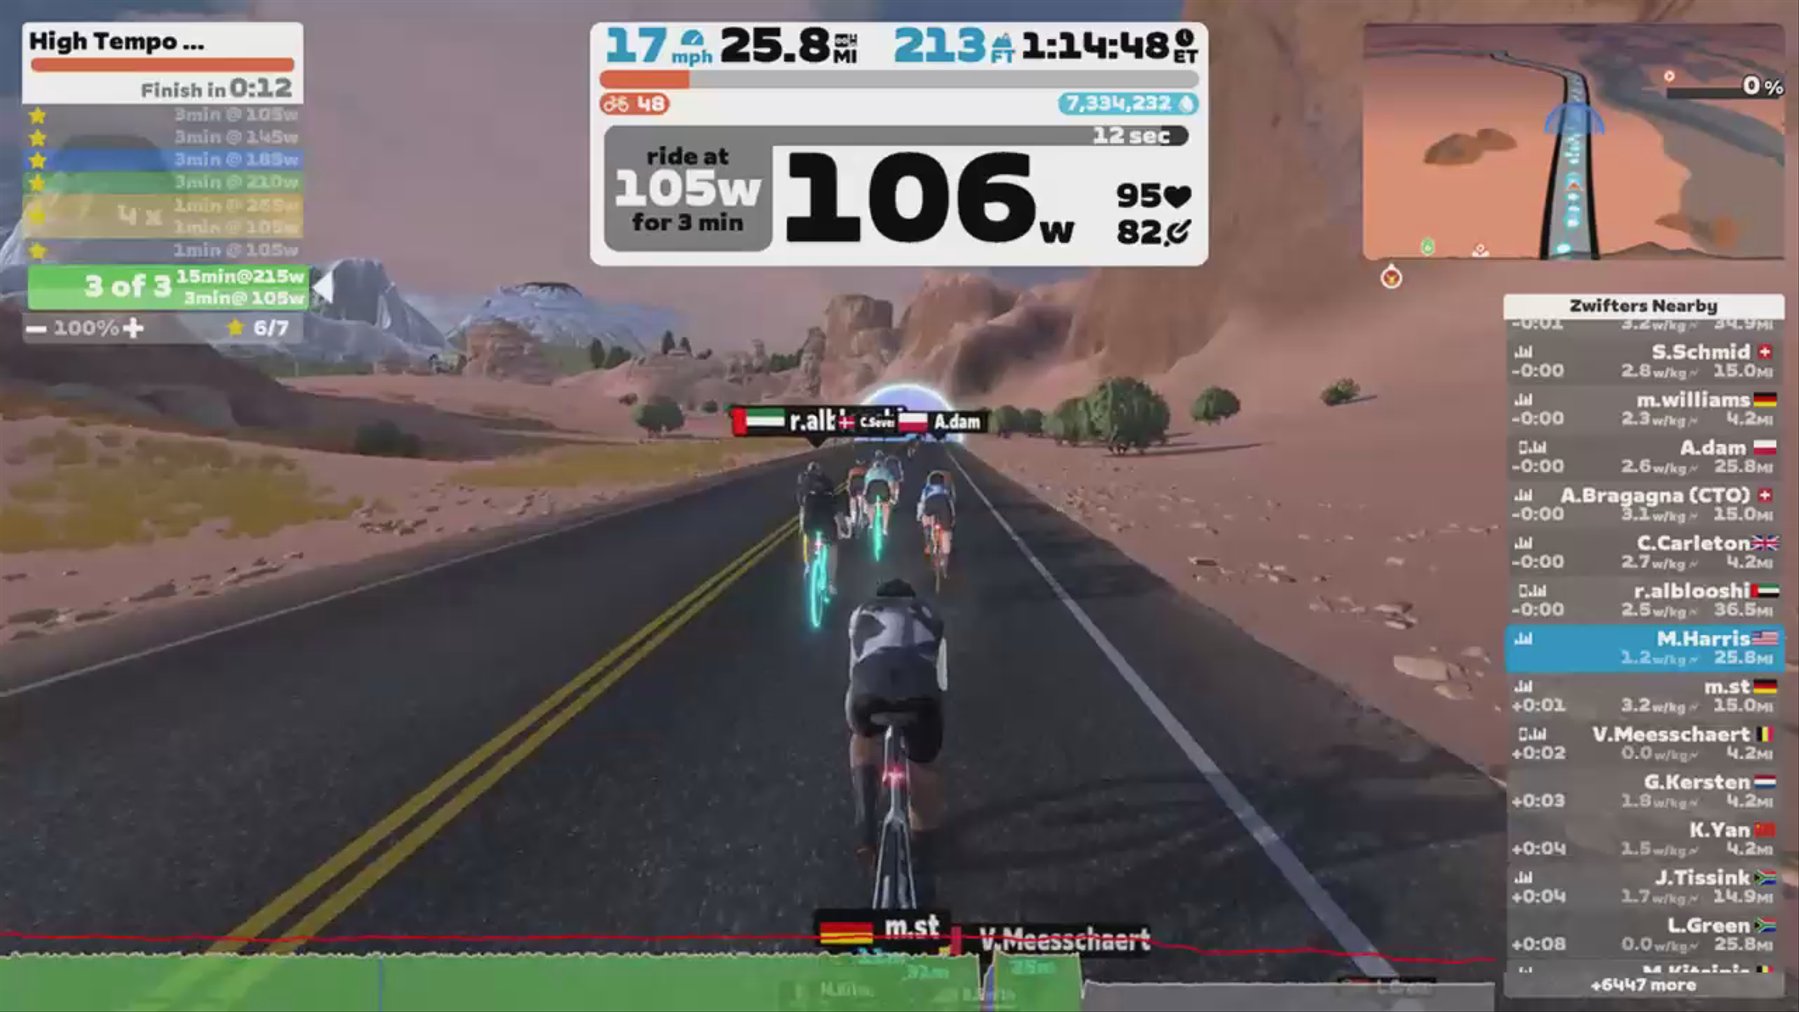 Zwift - High Tempo Intervals in Watopia